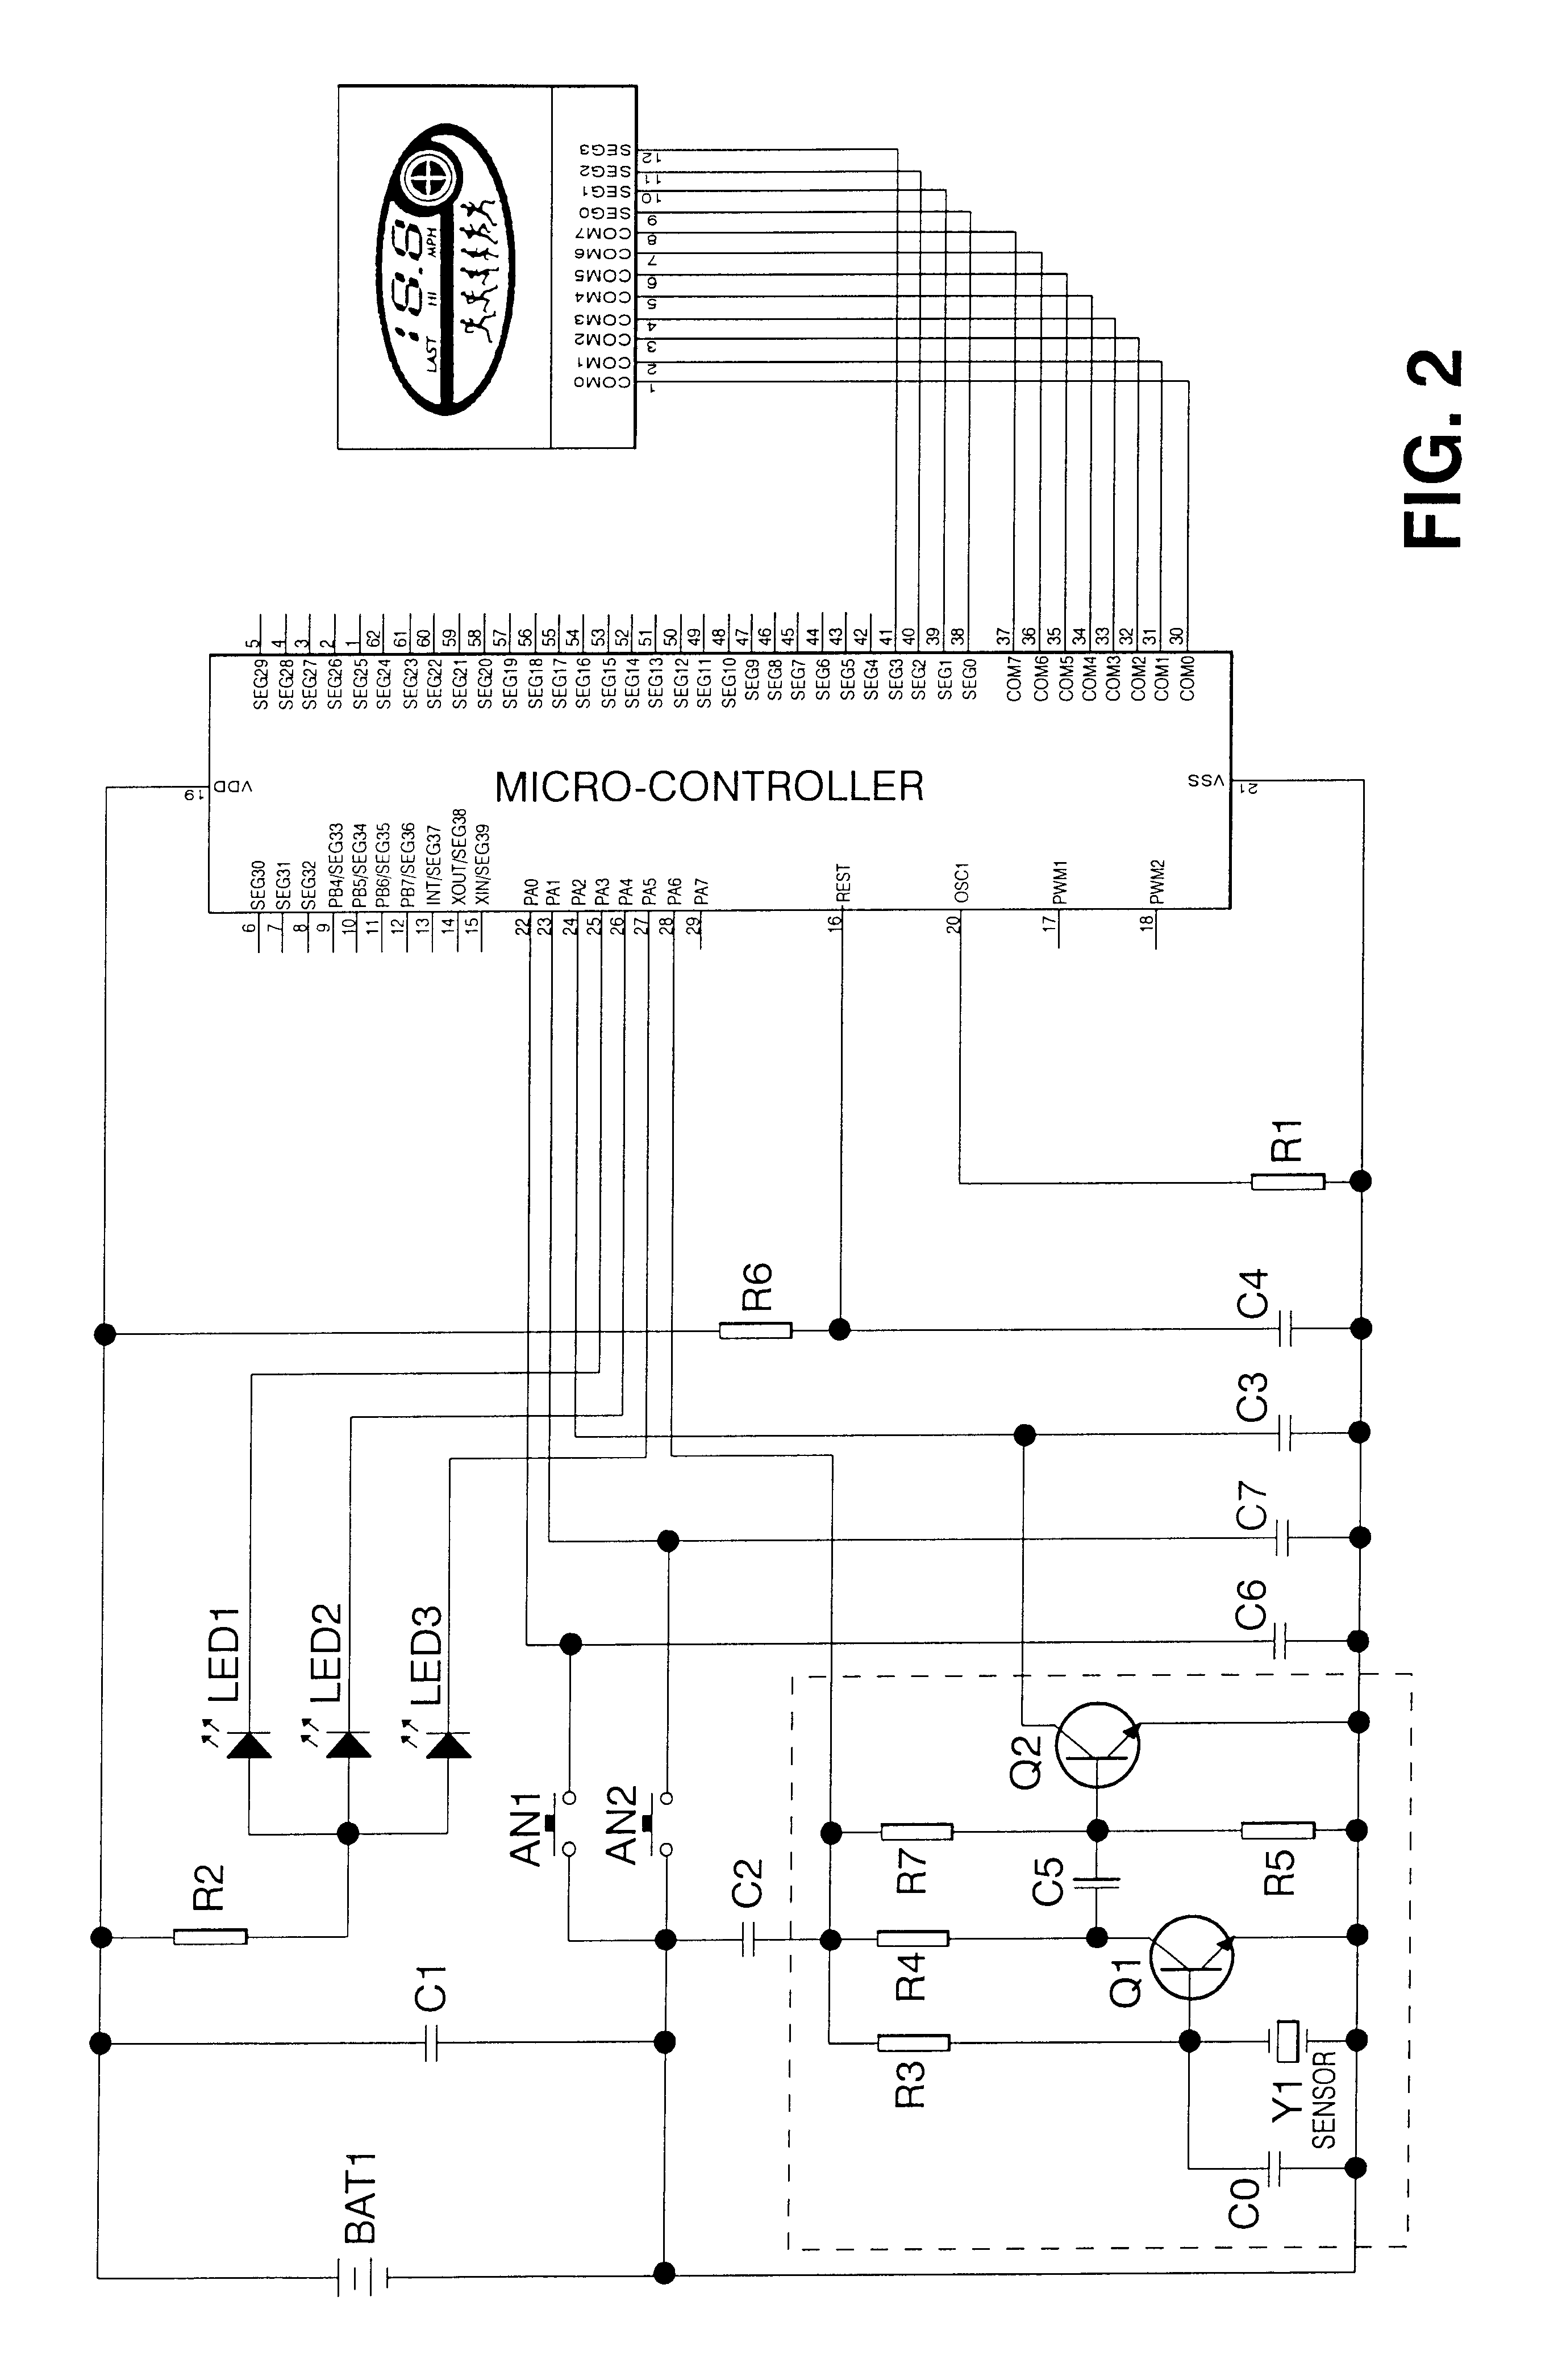 Apparatus and method for measuring the maximum speed of a runner over a prescribed distance